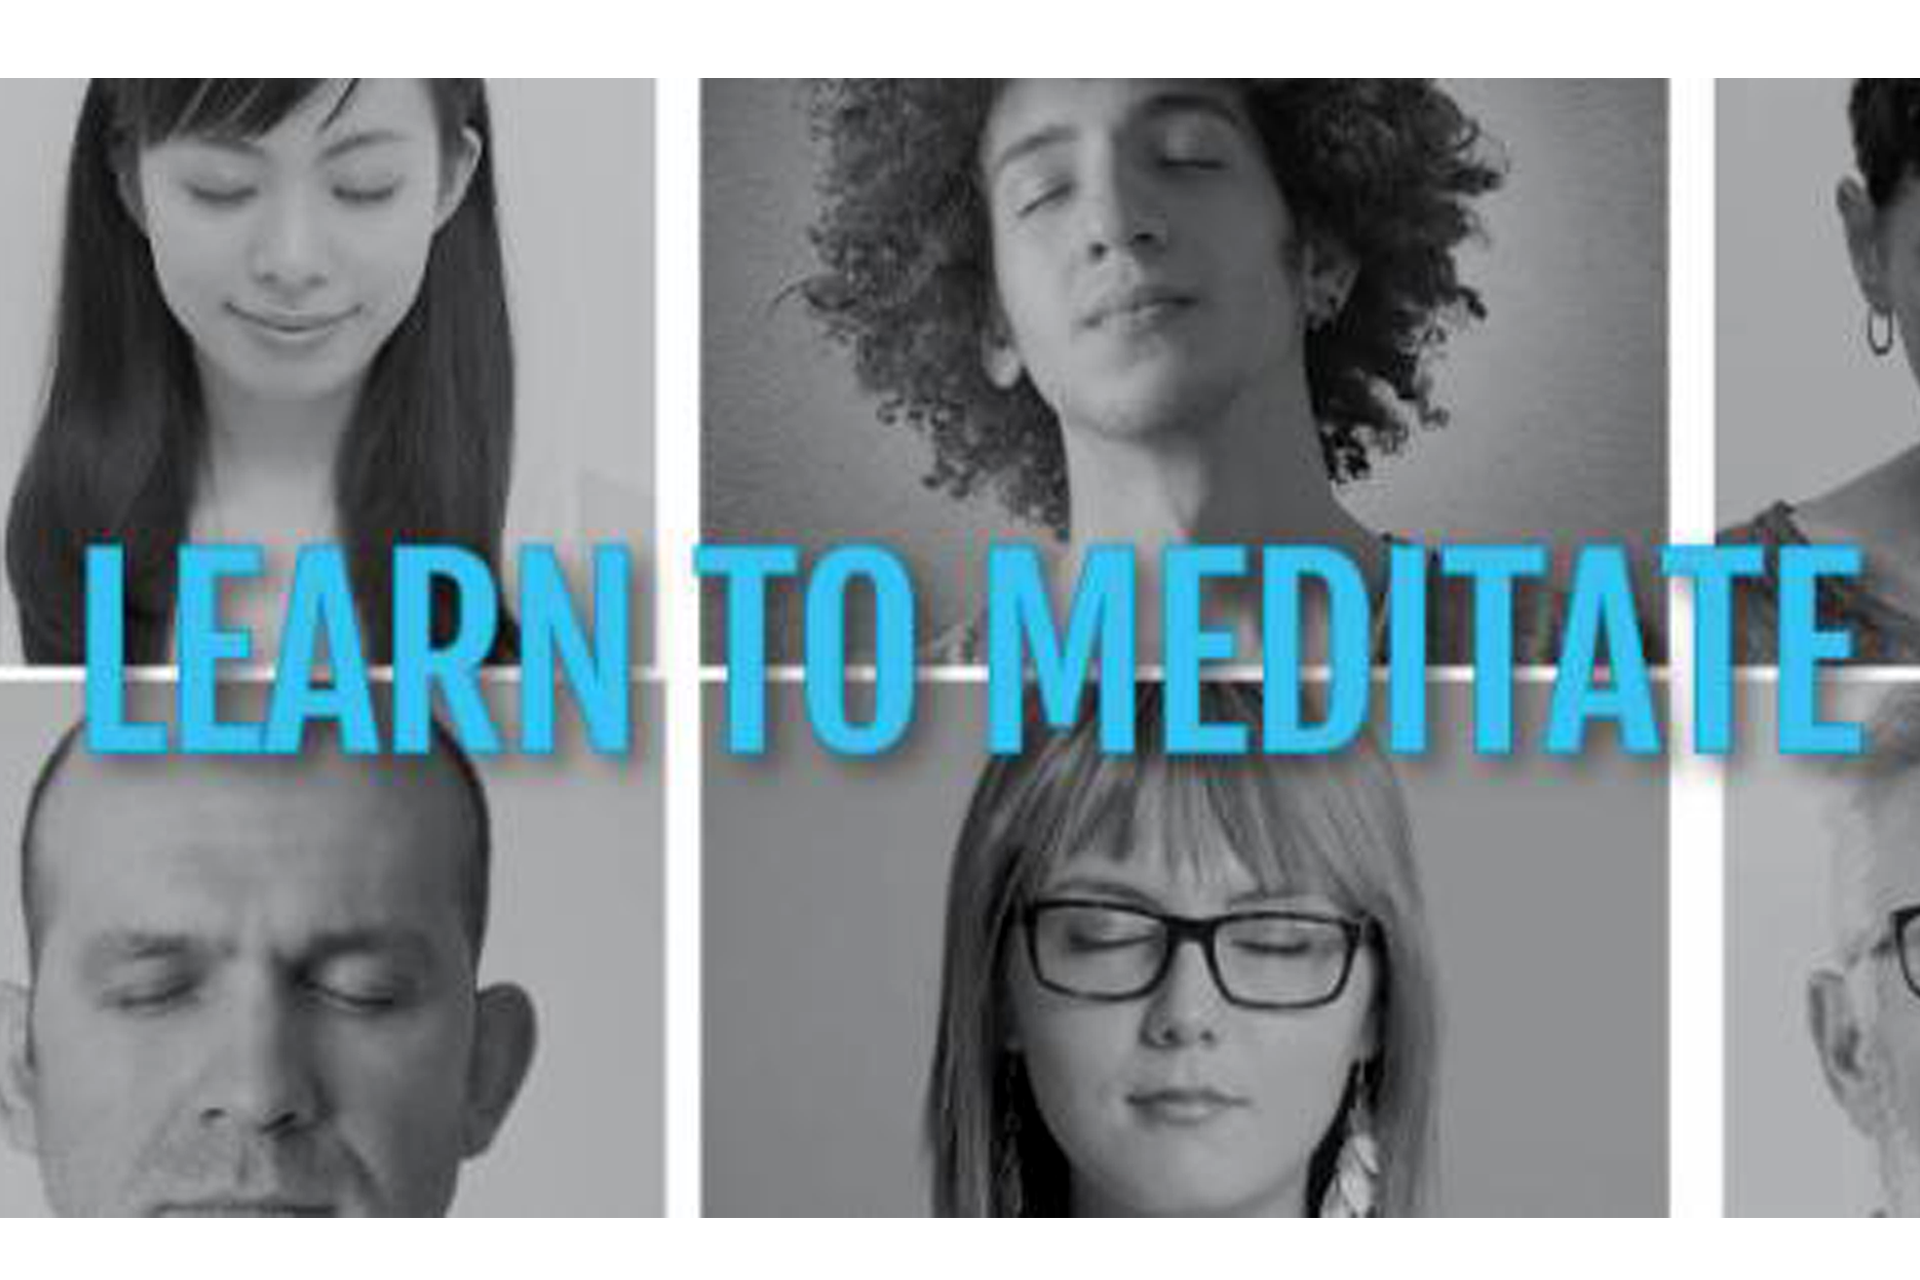 Learn to Meditate faces